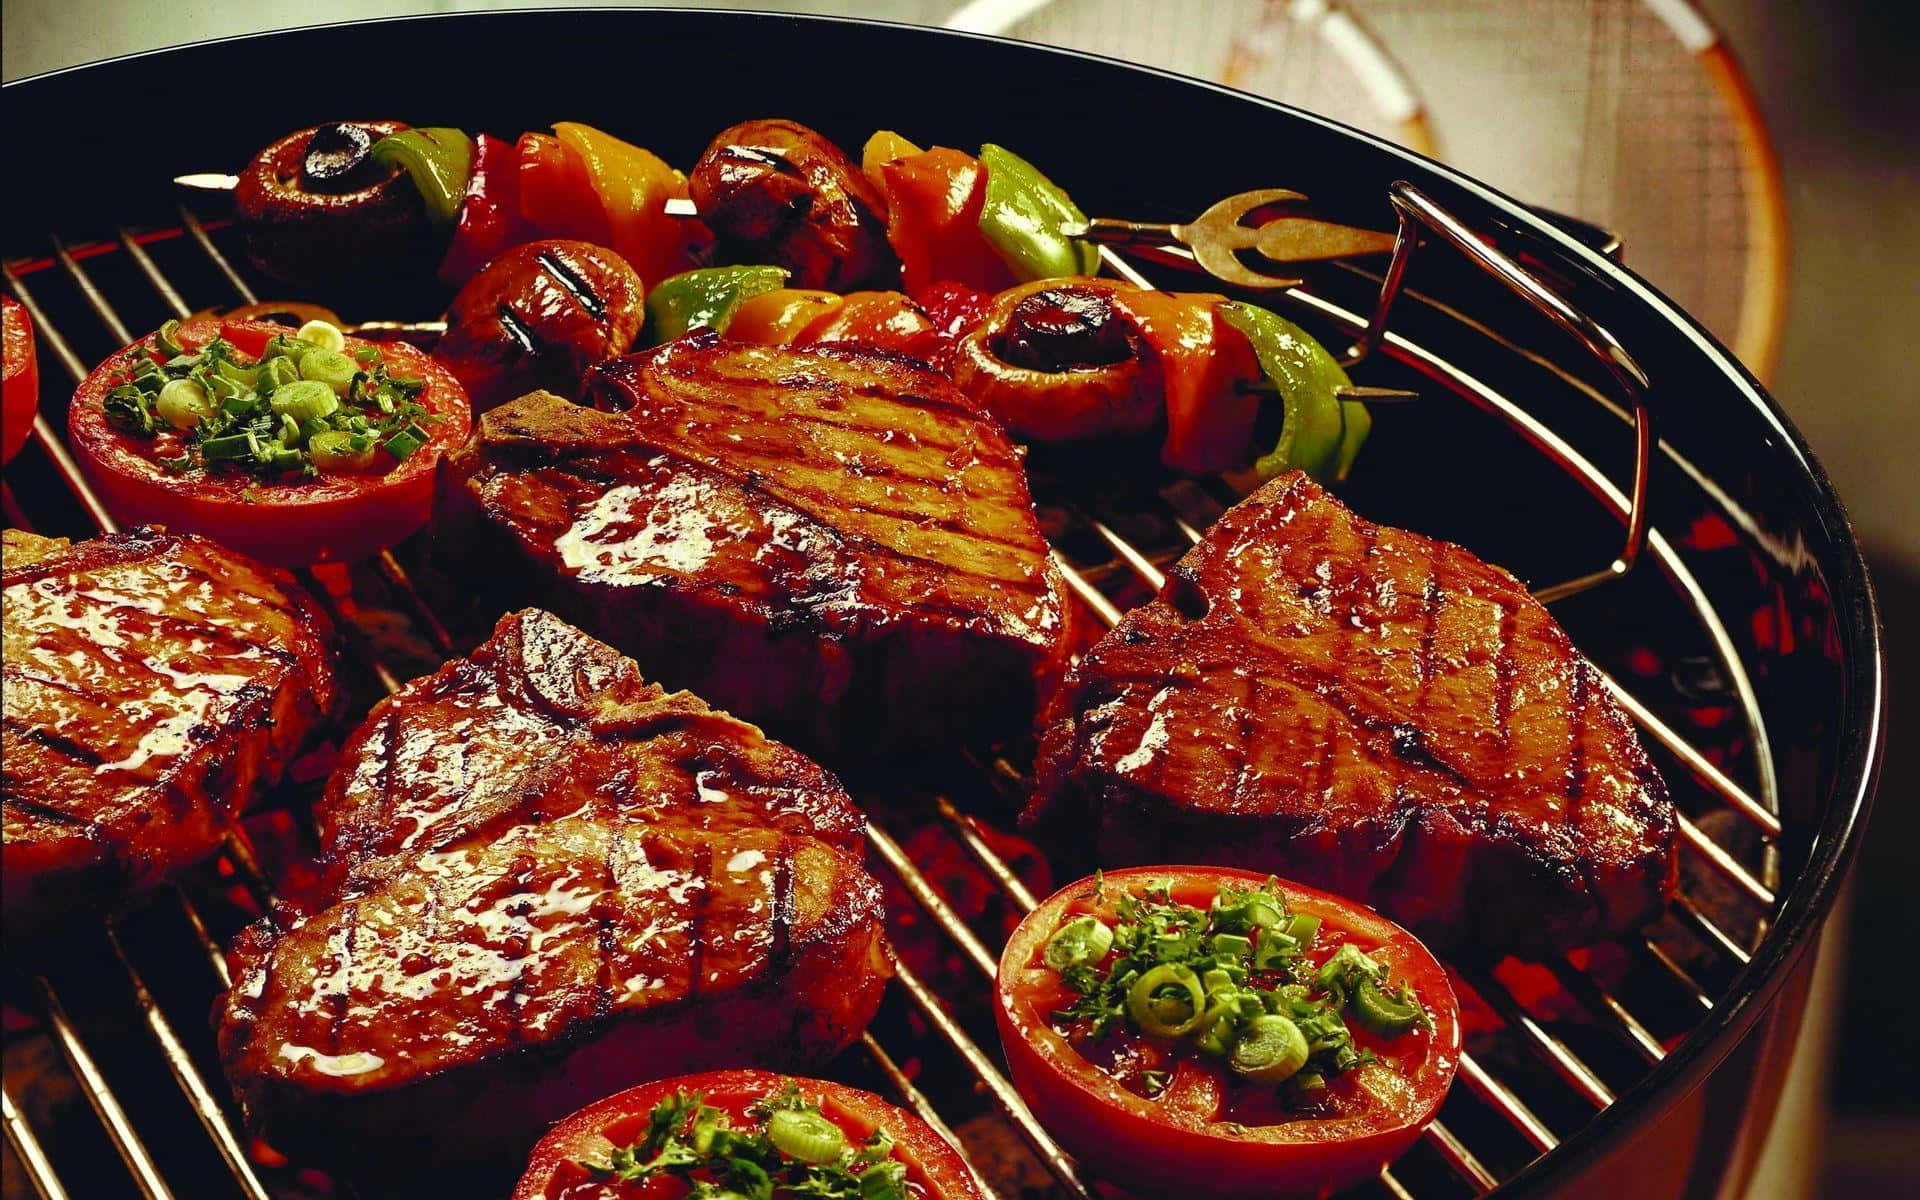 A Grill With Meat And Vegetables